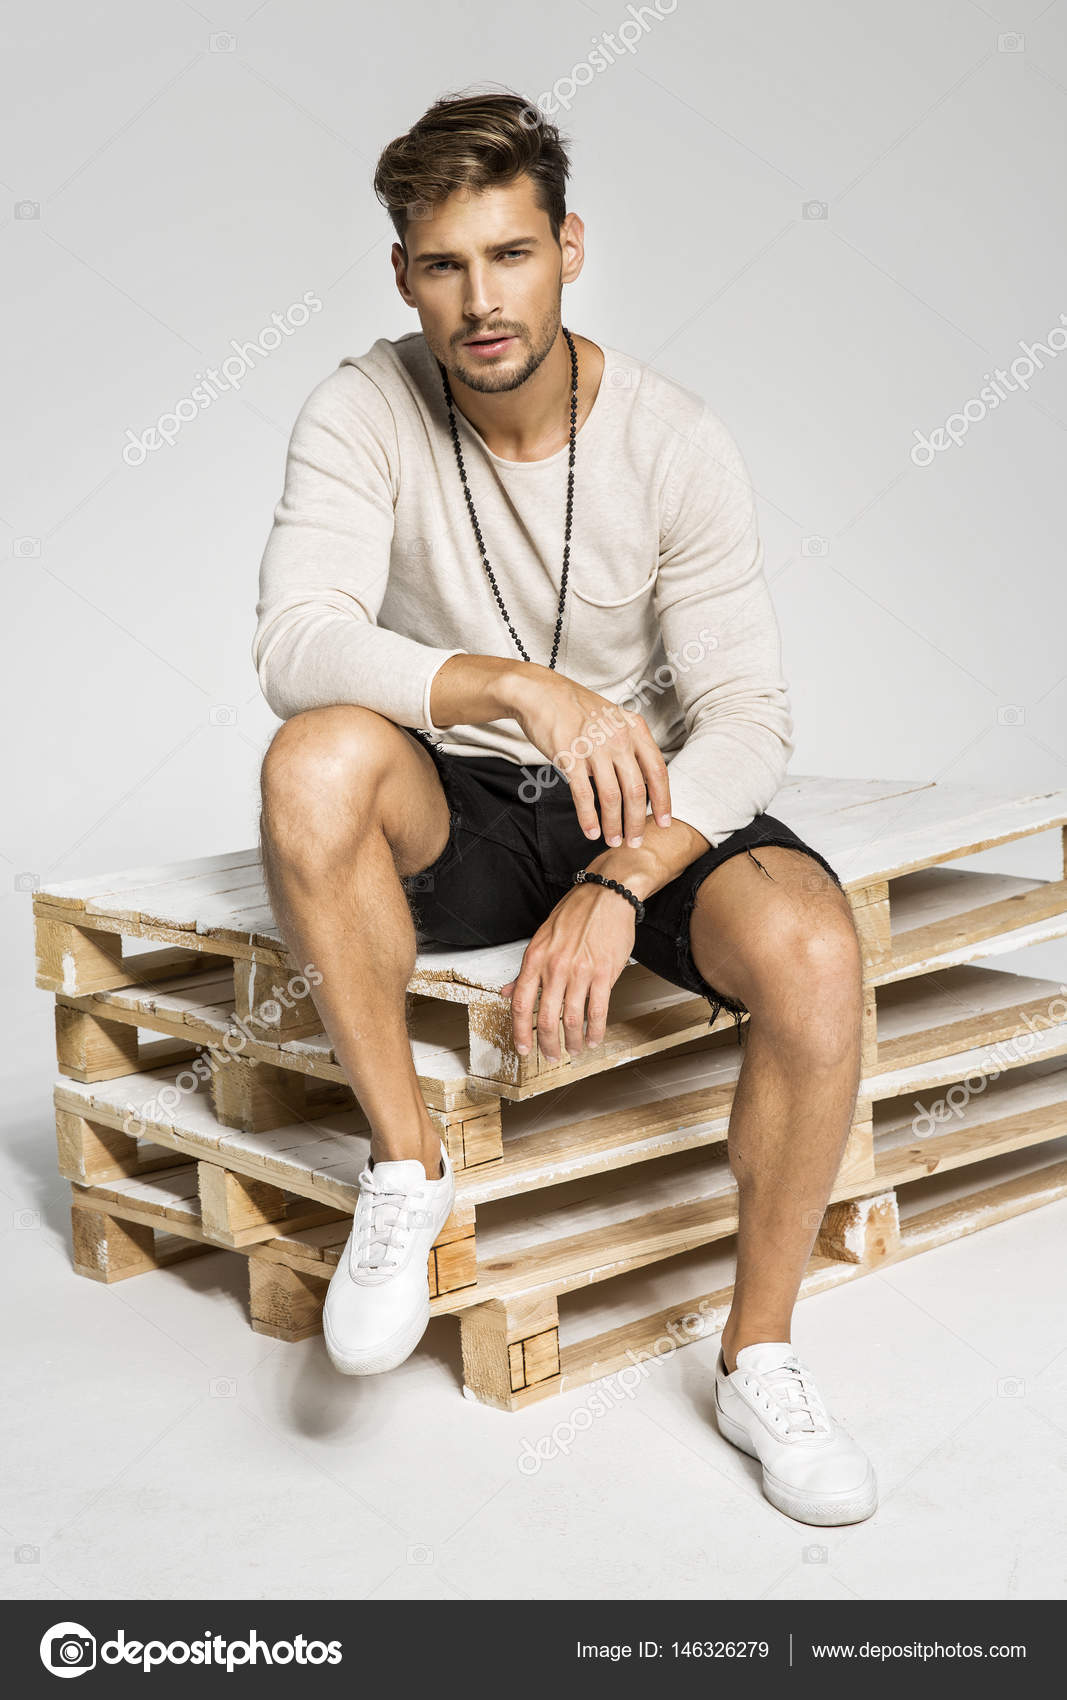 Charismatic young man sitting on chair in the... - Stock Photo [102597431]  - PIXTA